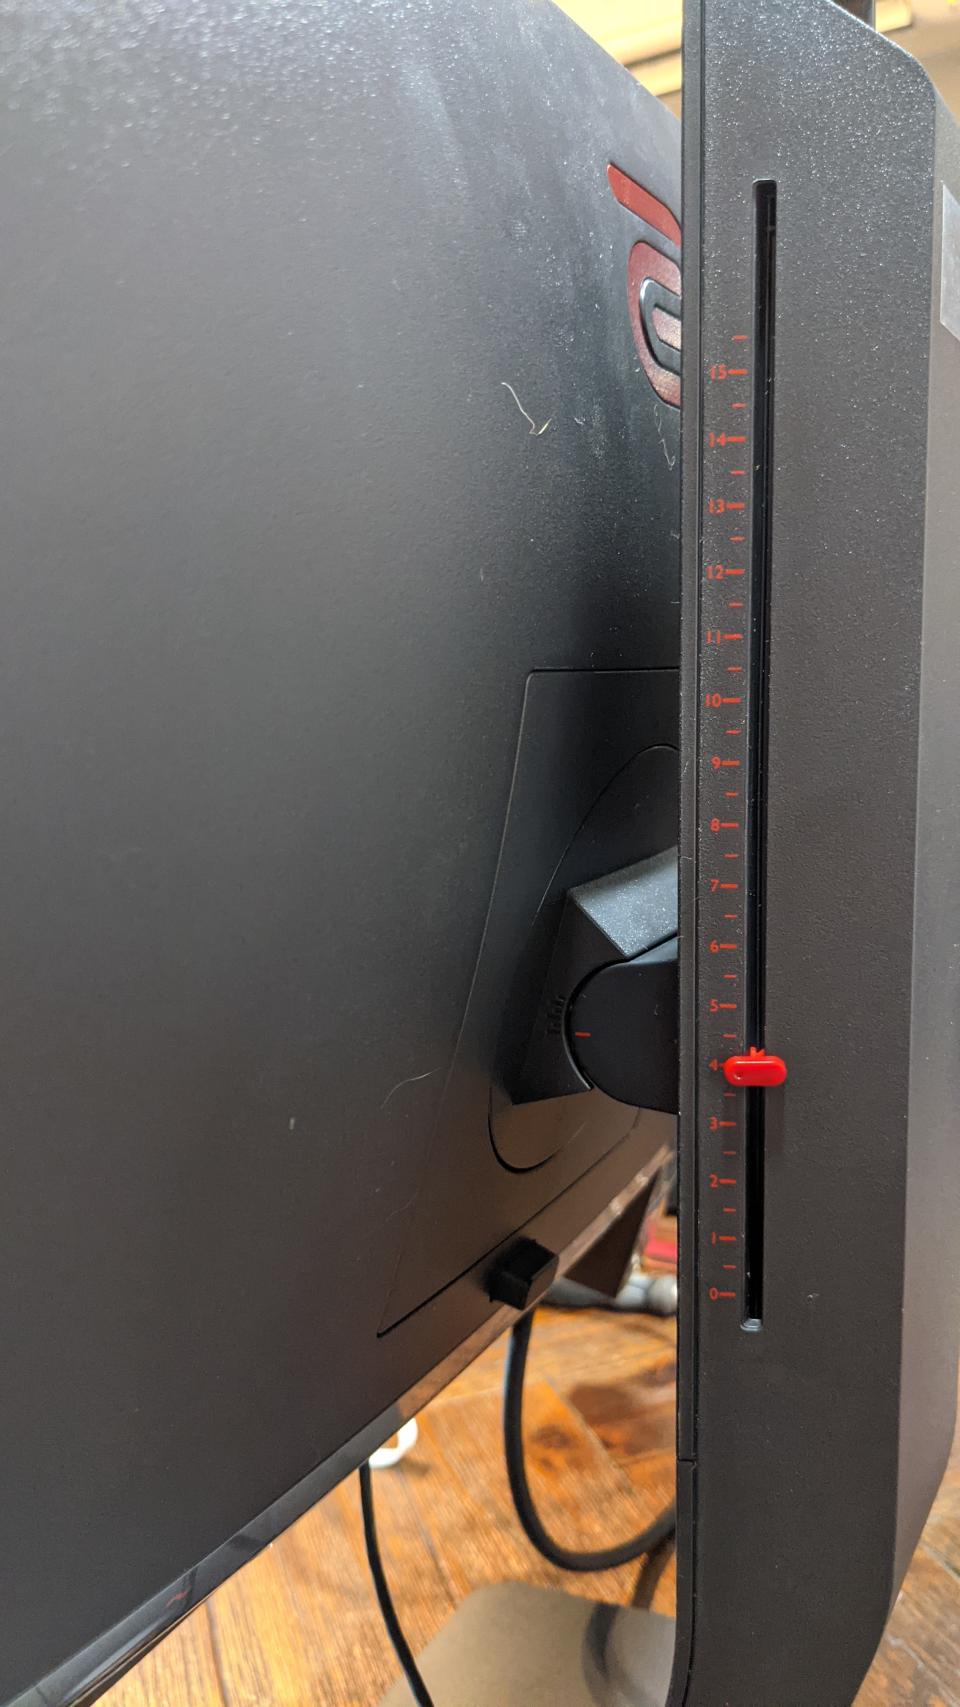 You can adjust the height and angle of the monitor
